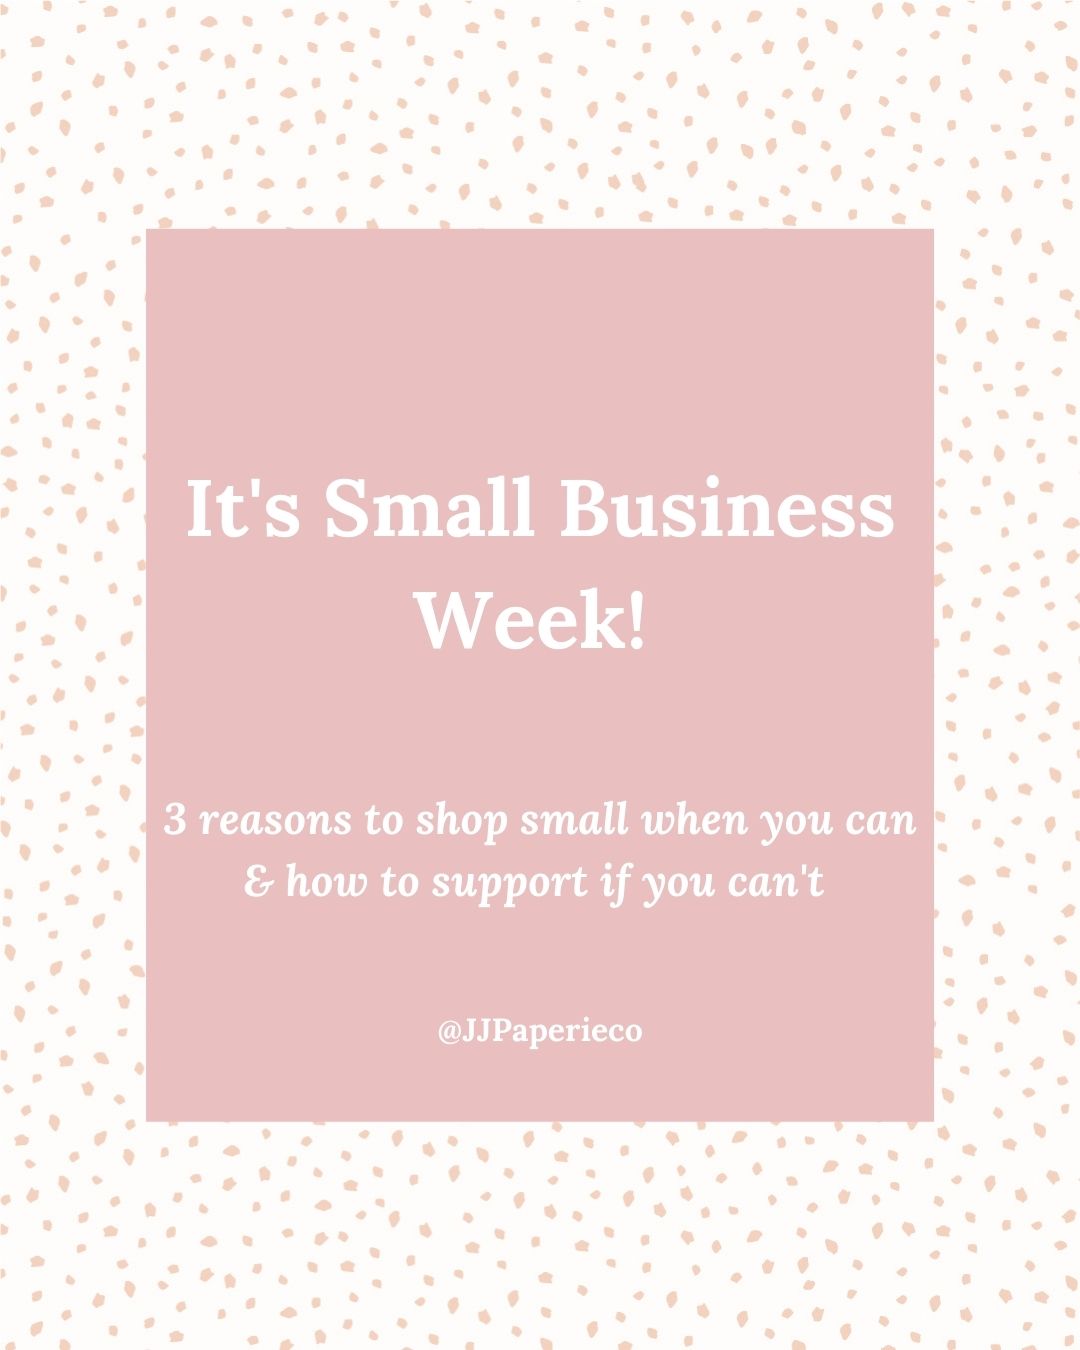 How to Support Small Businesses during Small Business Week